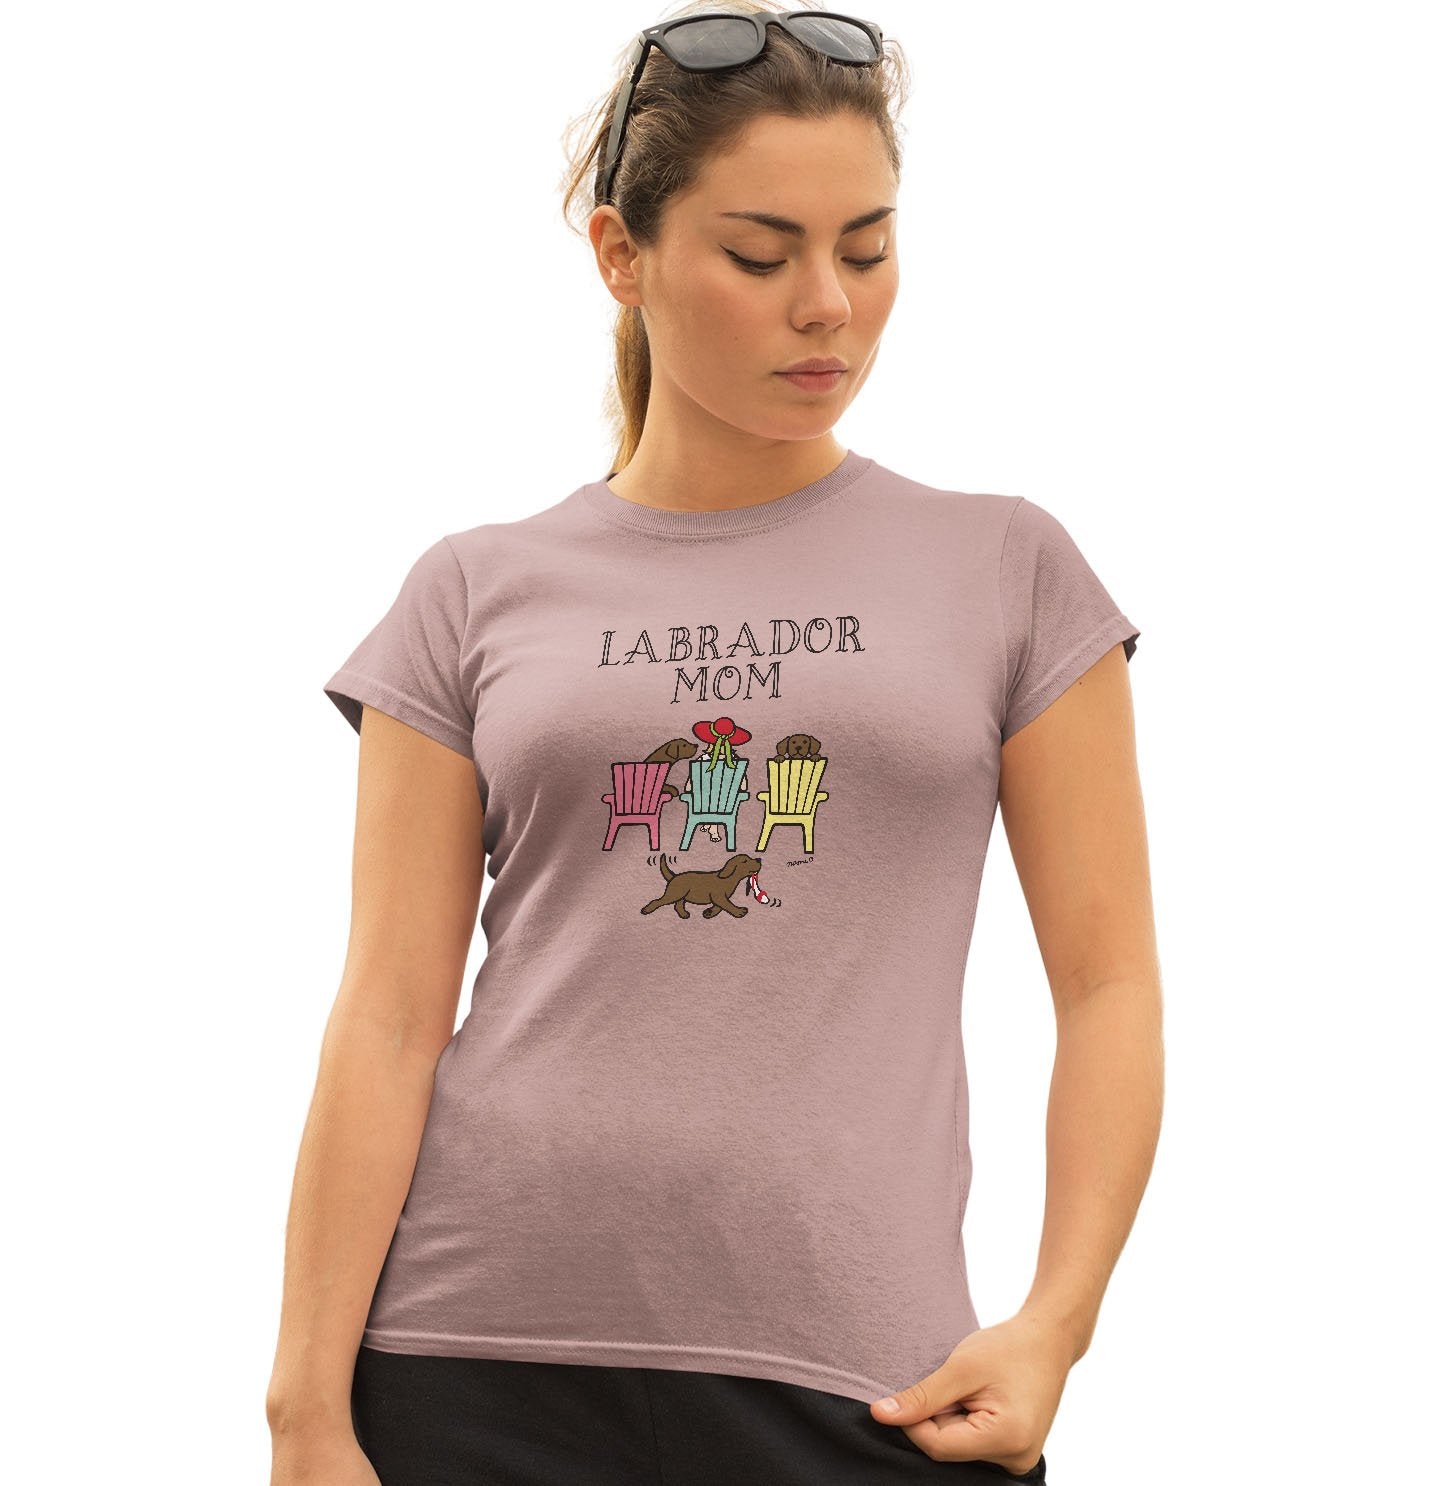 Chocolate Labrador Dog Mom - Deck Chairs Design - Women's Fitted T-Shirt